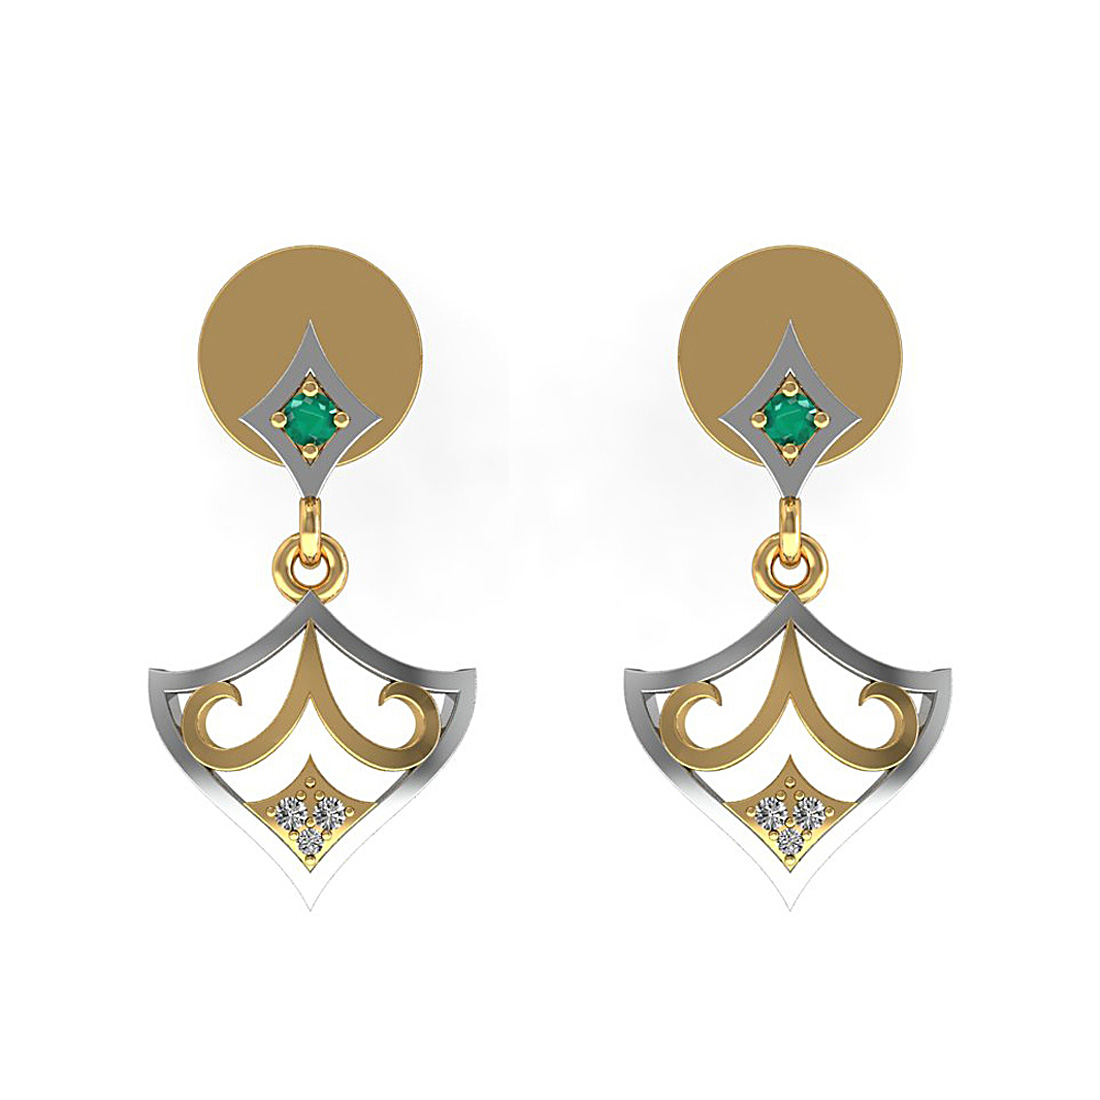 Natural diamond & emerald stud earrings made in 18k solid gold